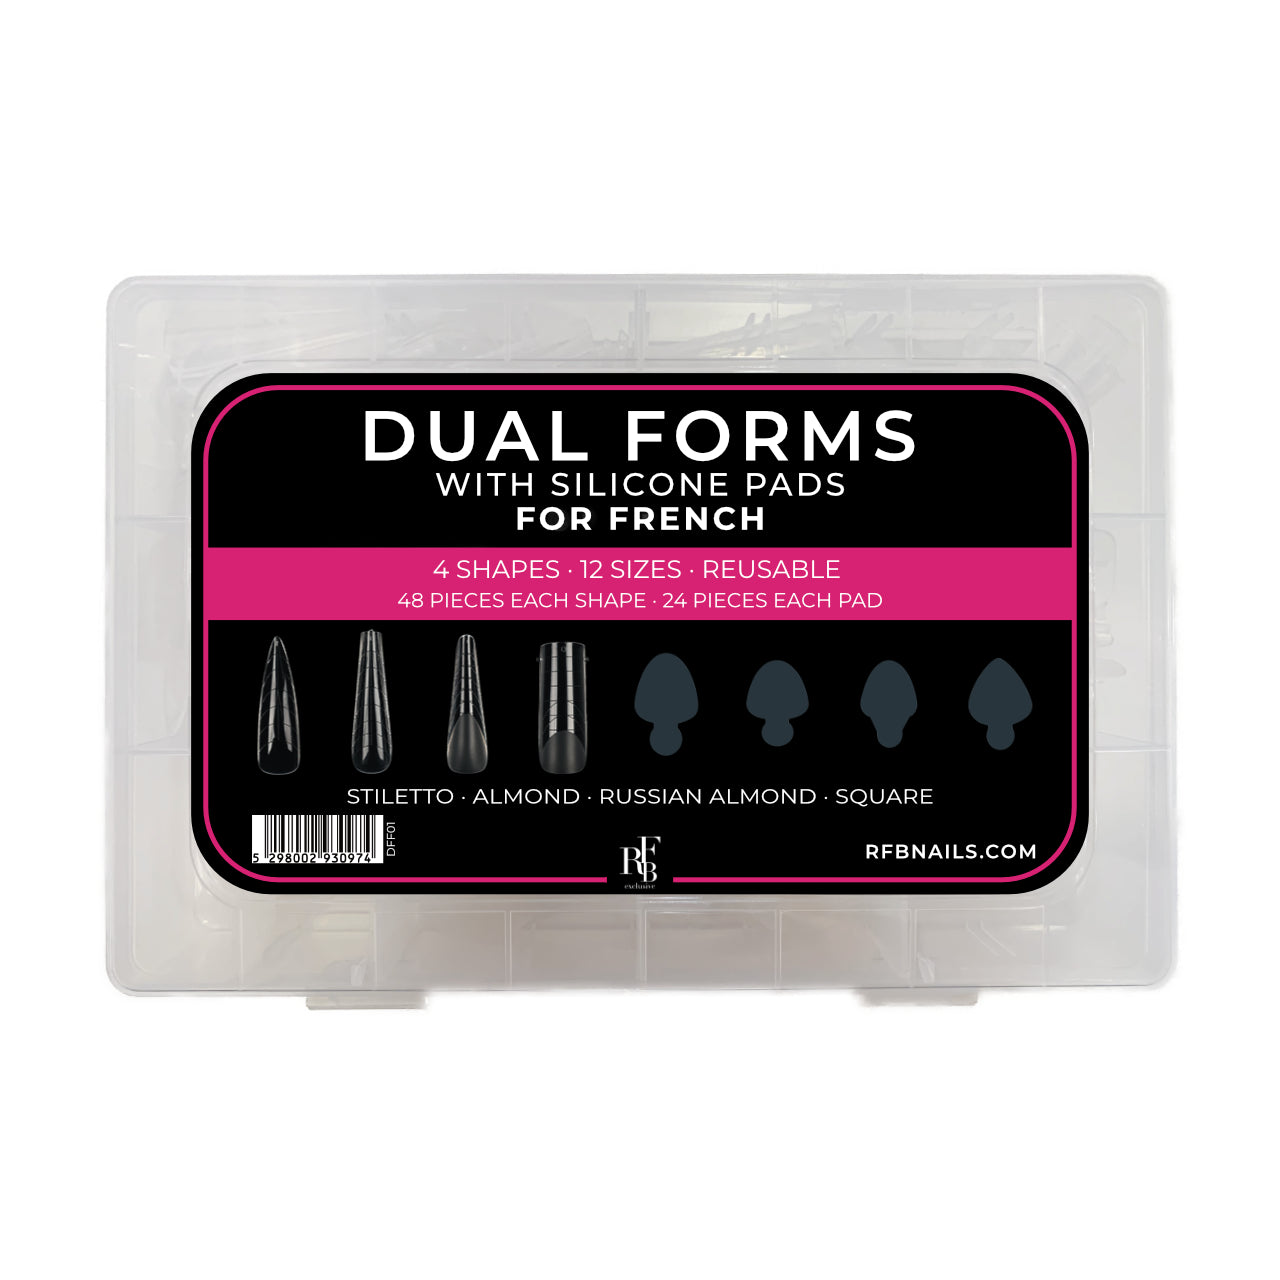 Dual Forms with Silicone Pads for French + Mini LED Lamp